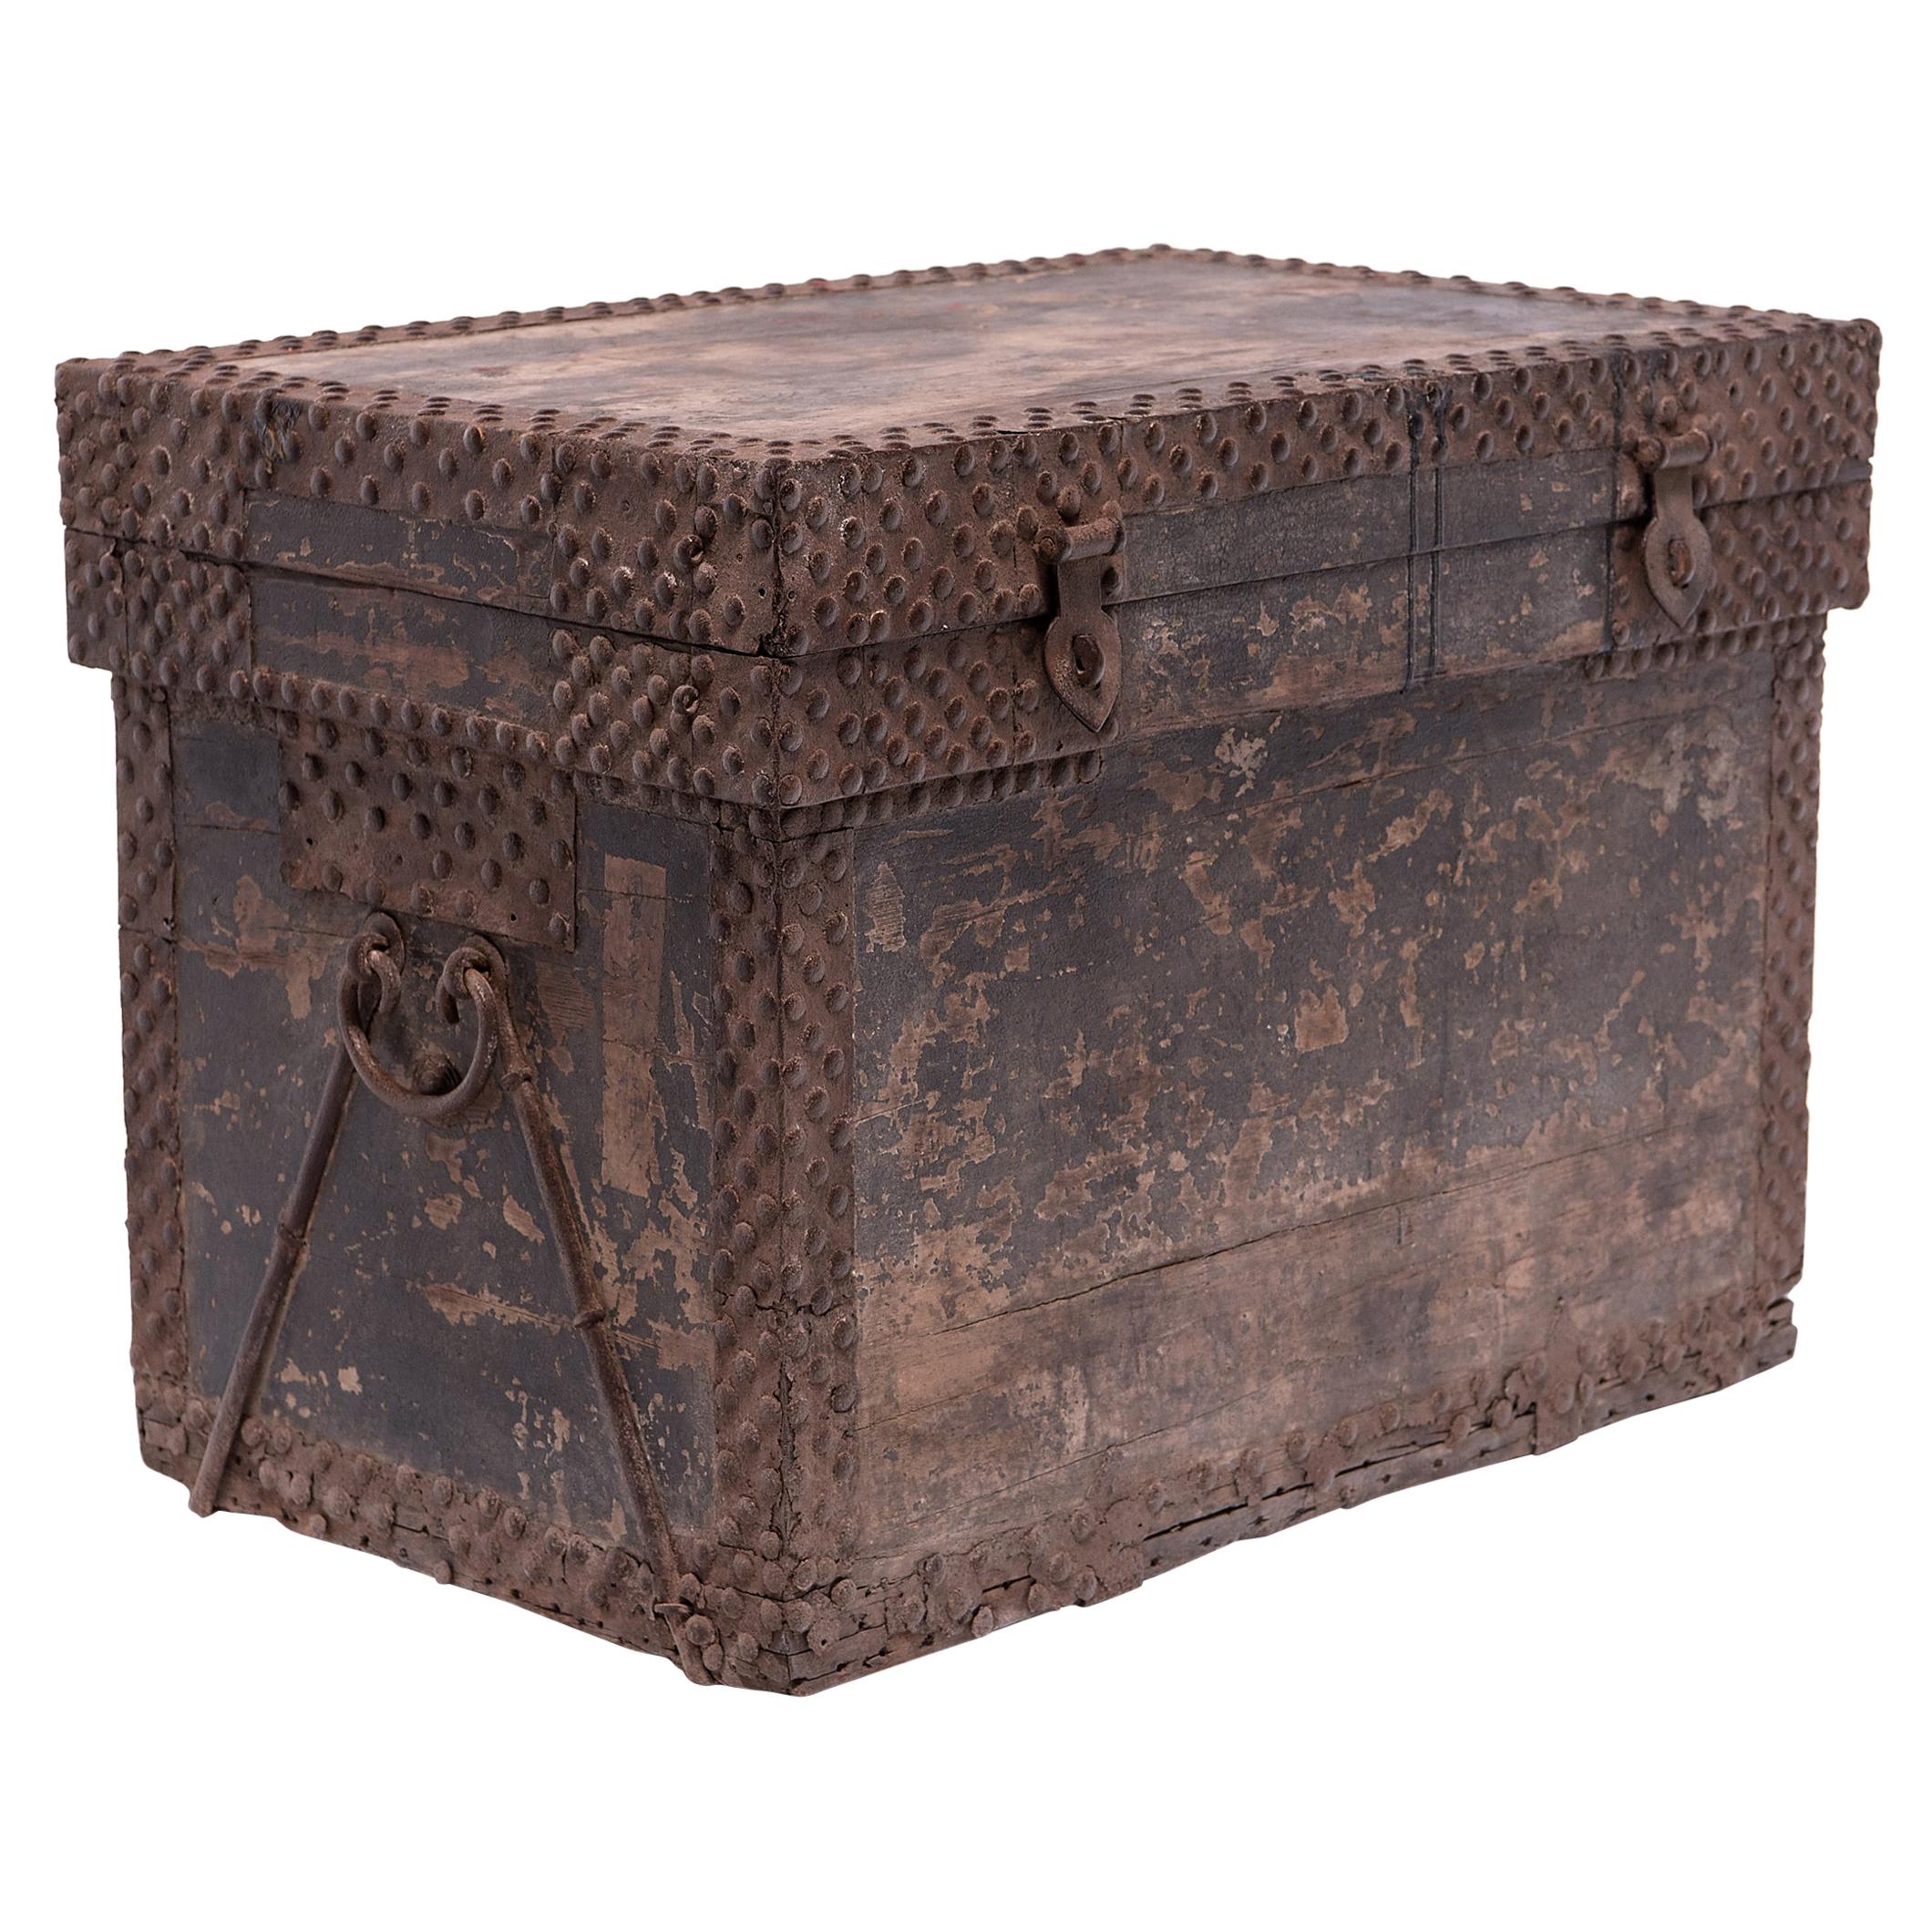 Chinese Studded Ming Traveling Chest, c. 1600